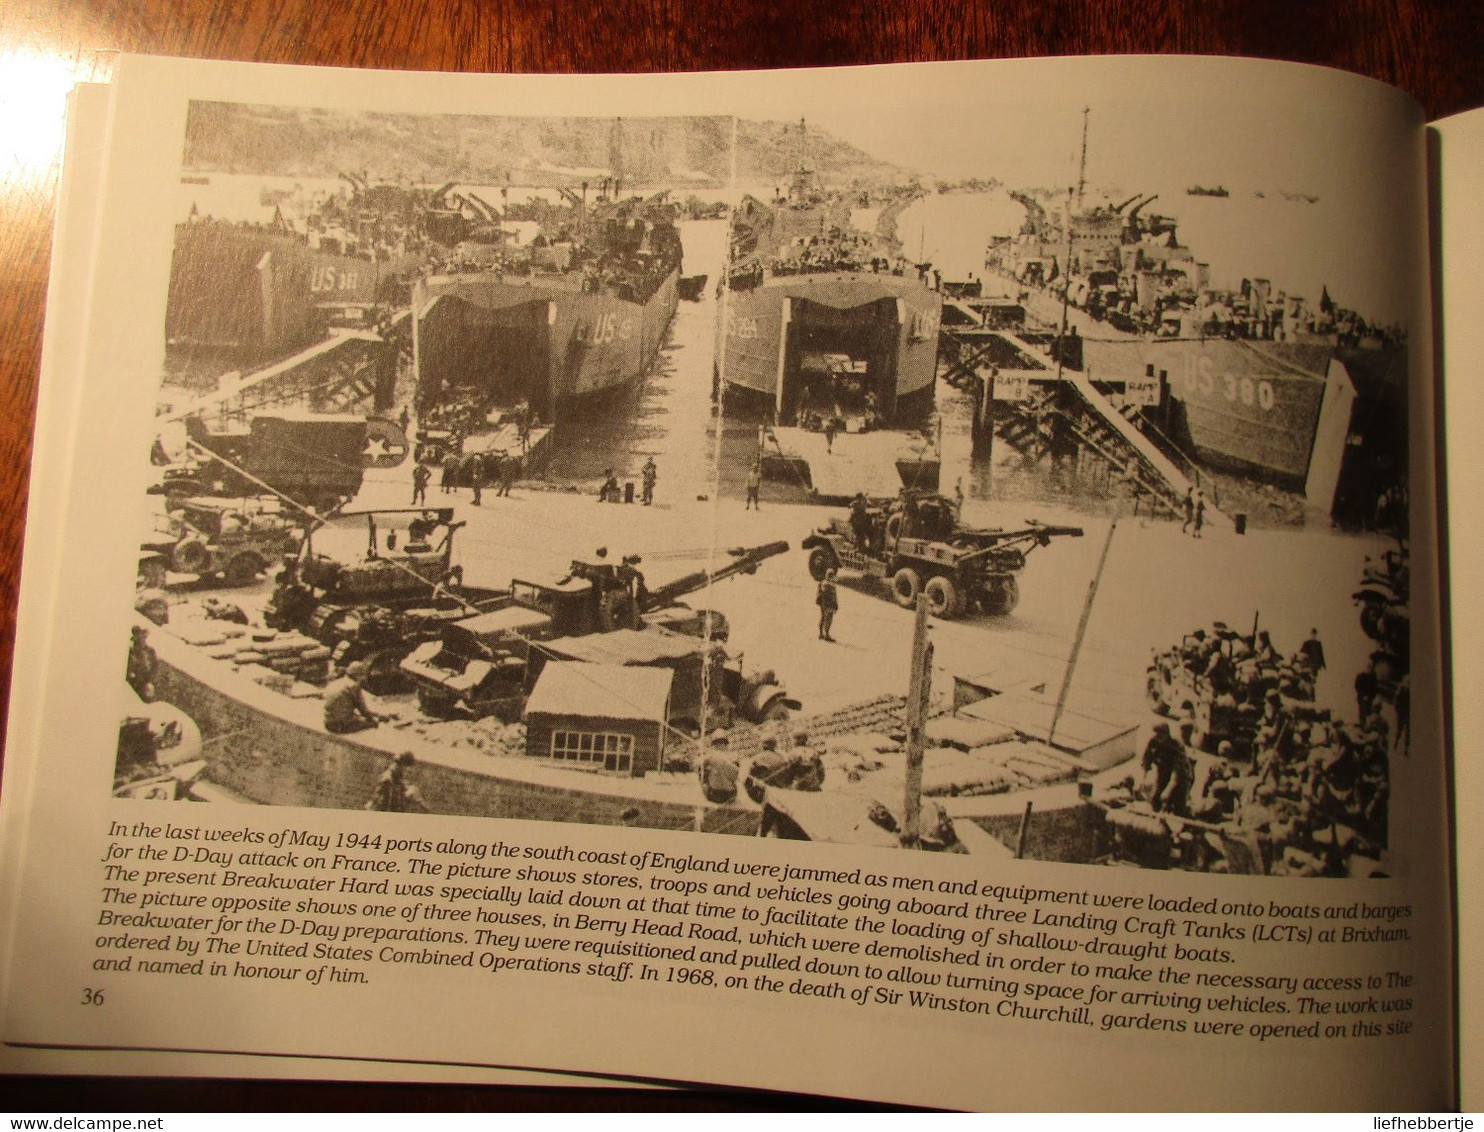 A Brixham Album - compiled by the Brixham Museum and History Society - Obelisk Publications - 1994